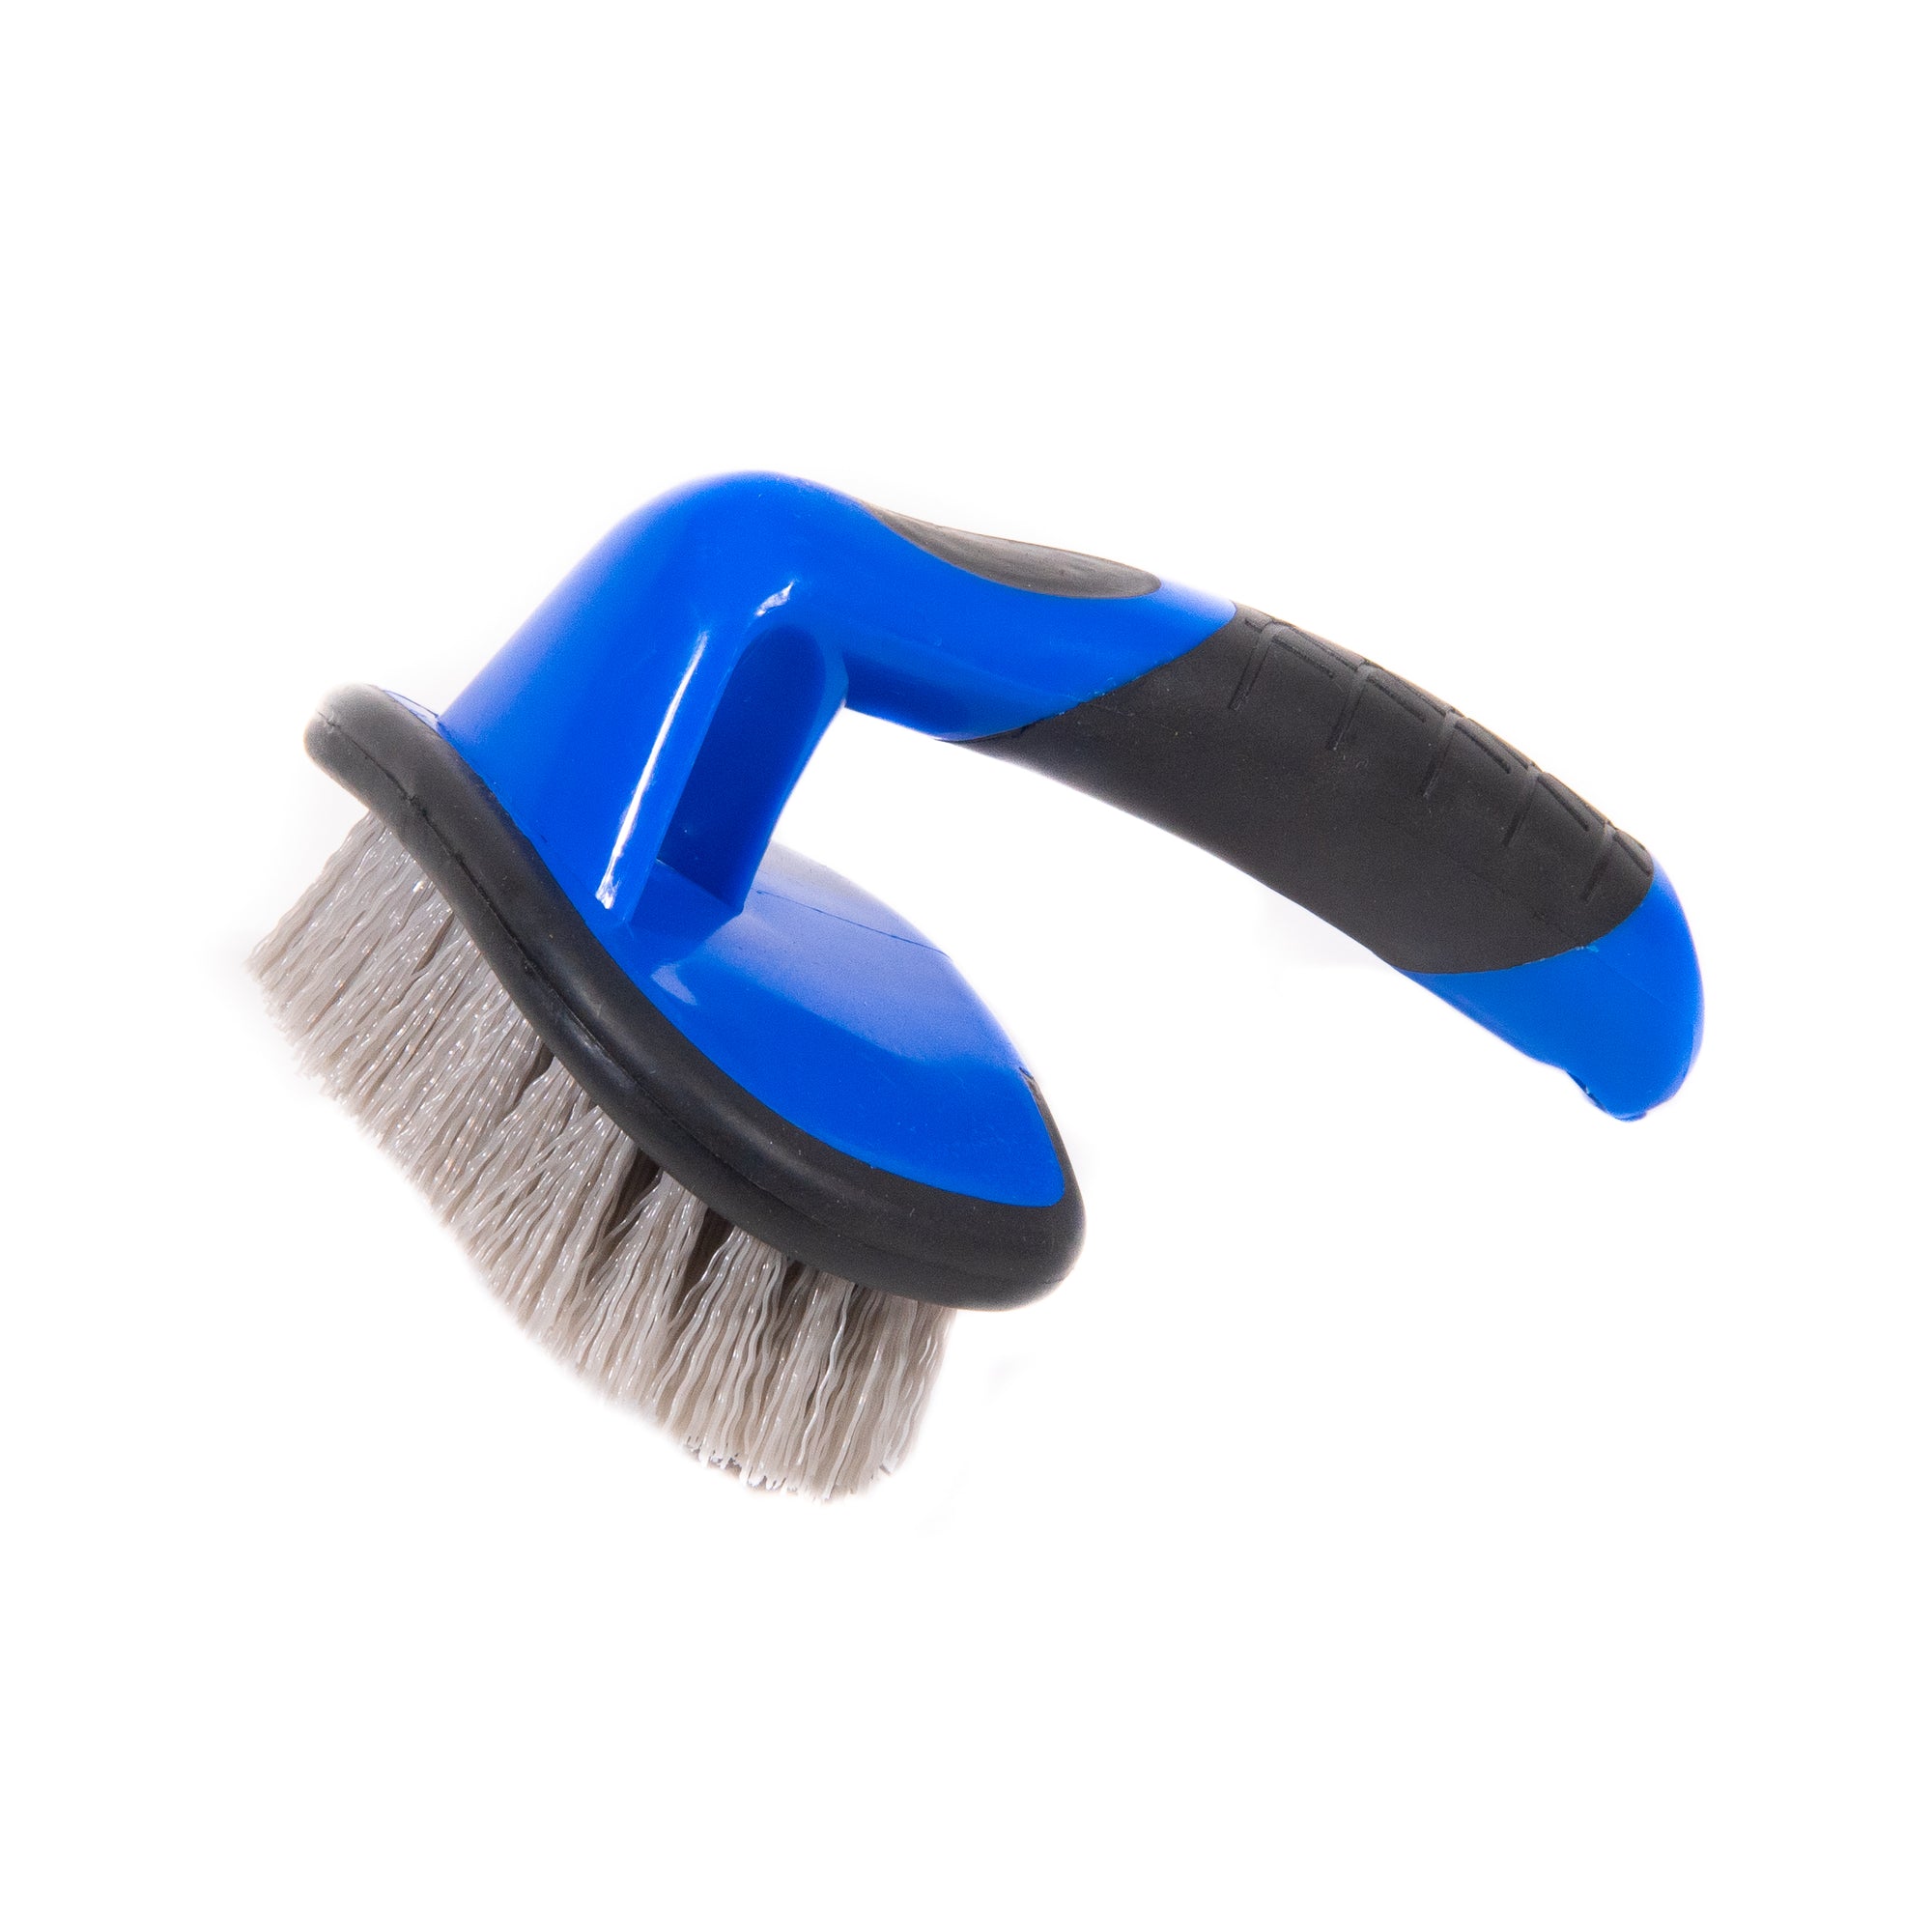 Ceyes Tire Soft Wheel Brush Car Rim Scrubber And Duster Handle For  Motorcycle, Truck, And Wheel Detailing From Trendshomes, $6.54